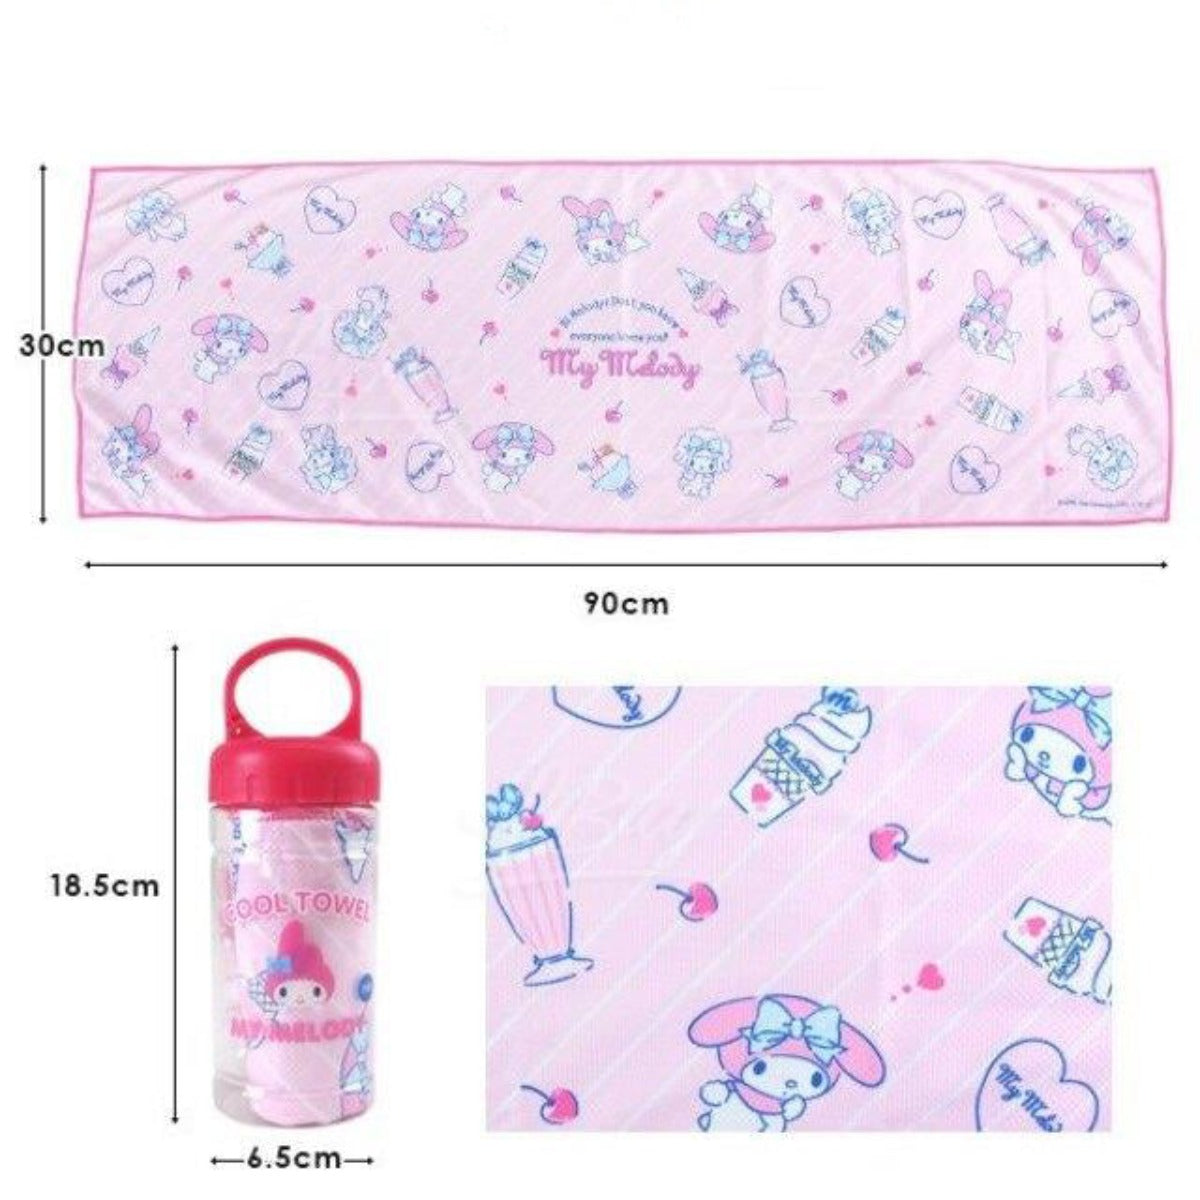 Cool Towel in Bottle - Sanrio My Melody Pink